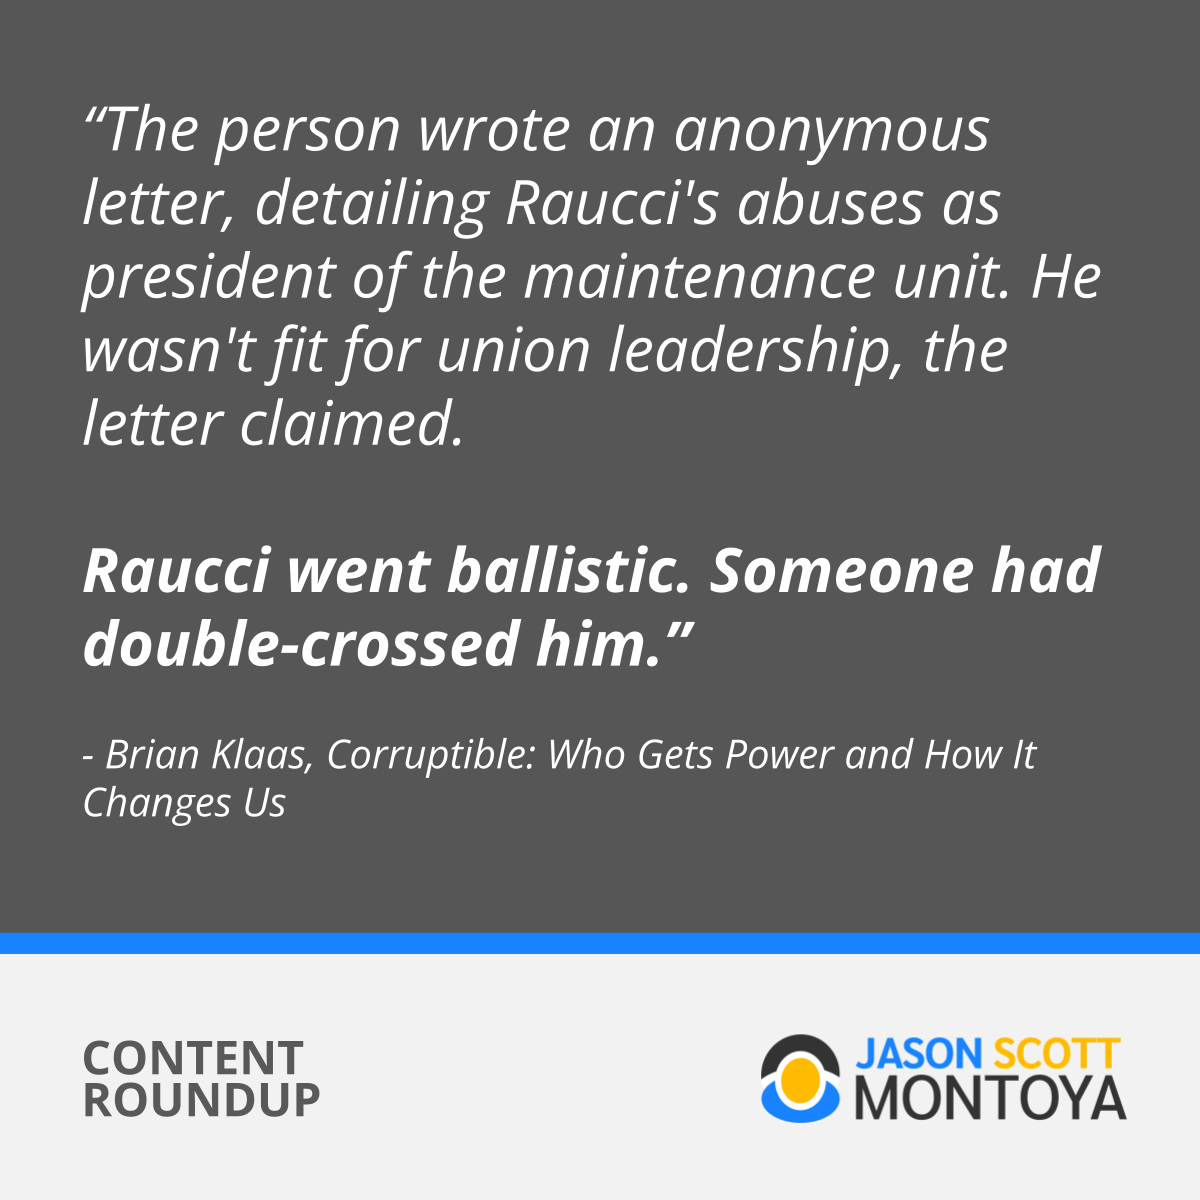 The person wrote an anonymous letter, detailing Raucci's abuses as president of the maintenance unit. He wasn't fit for union leadership, the letter claimed. Raucci went ballistic. Someone had double-crossed him.” - Brian Klaas, Corruptible (Book)